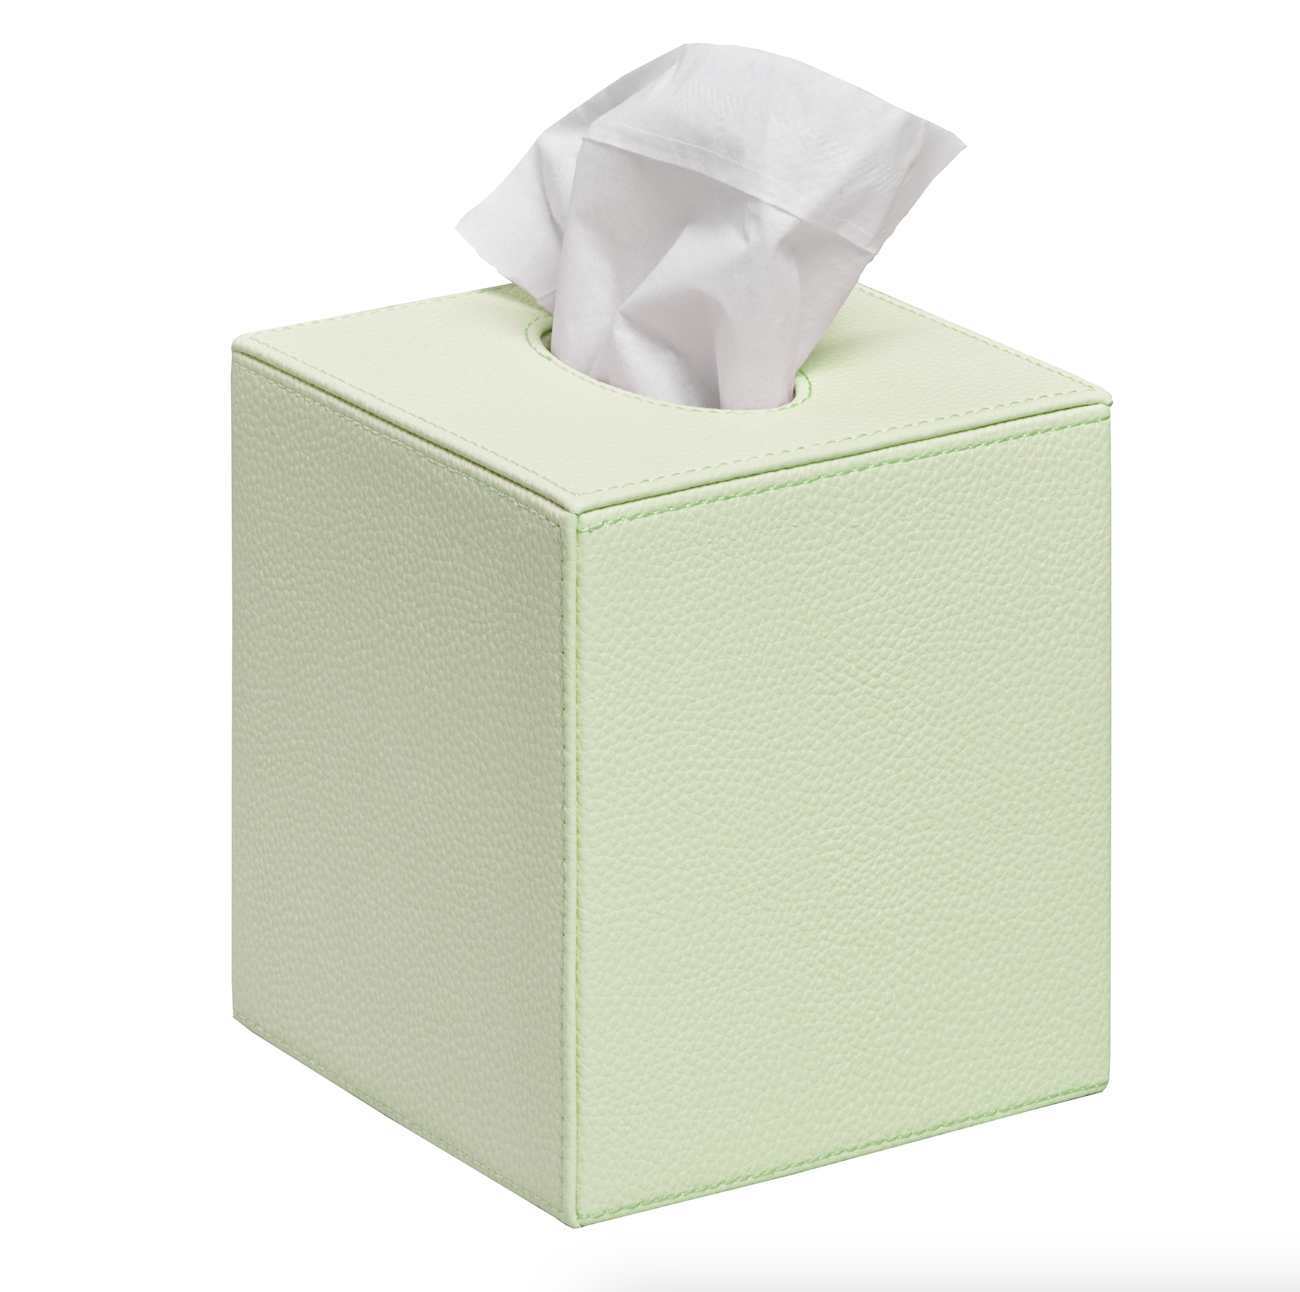 Faux Leather Tissue Box - Light Green